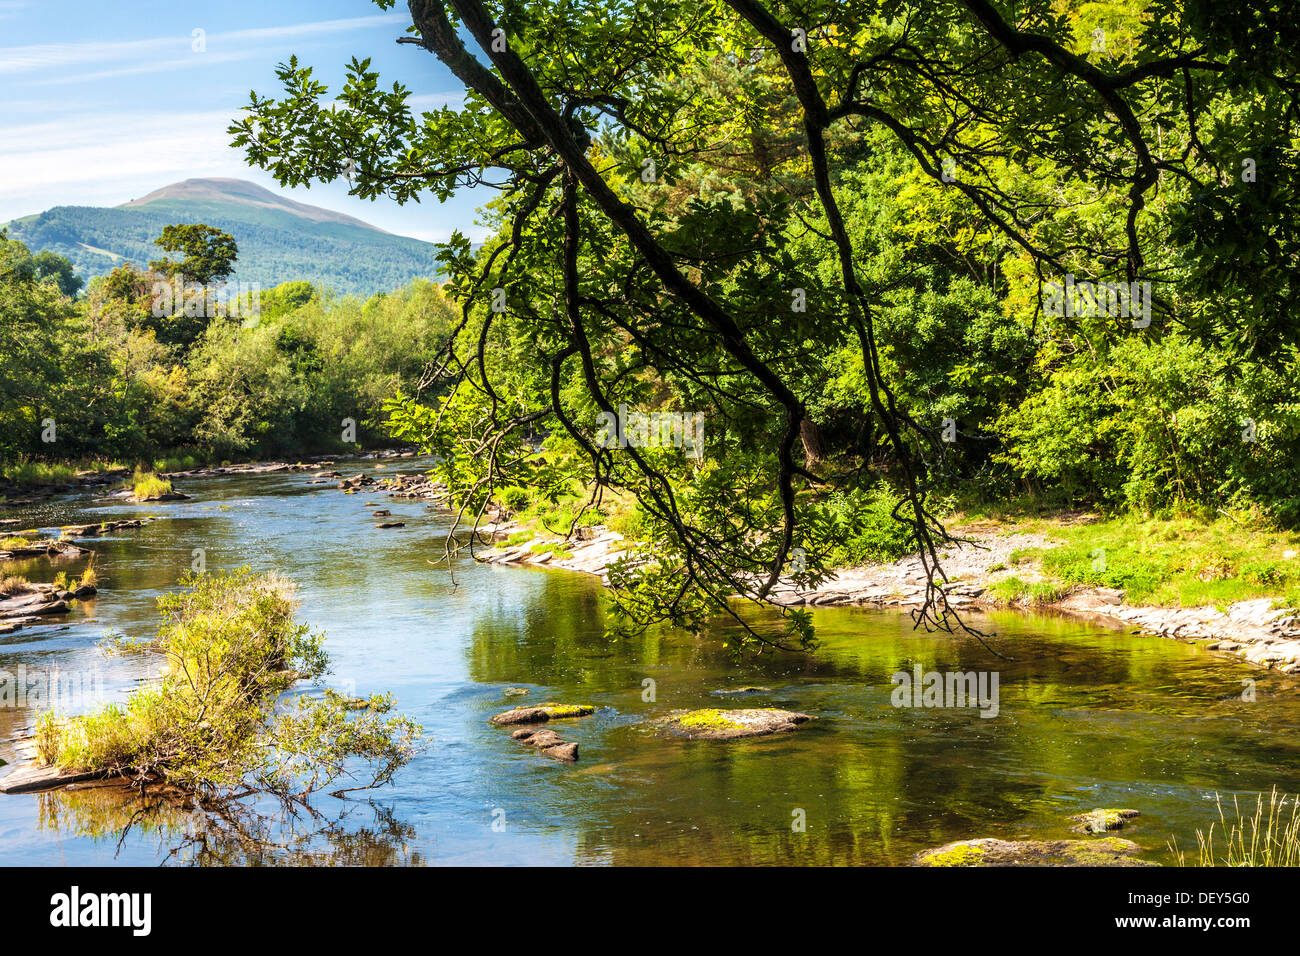 The River Usk looking towards Tor y Foel in the Brecon Beacons National Park, Wales. Stock Photo